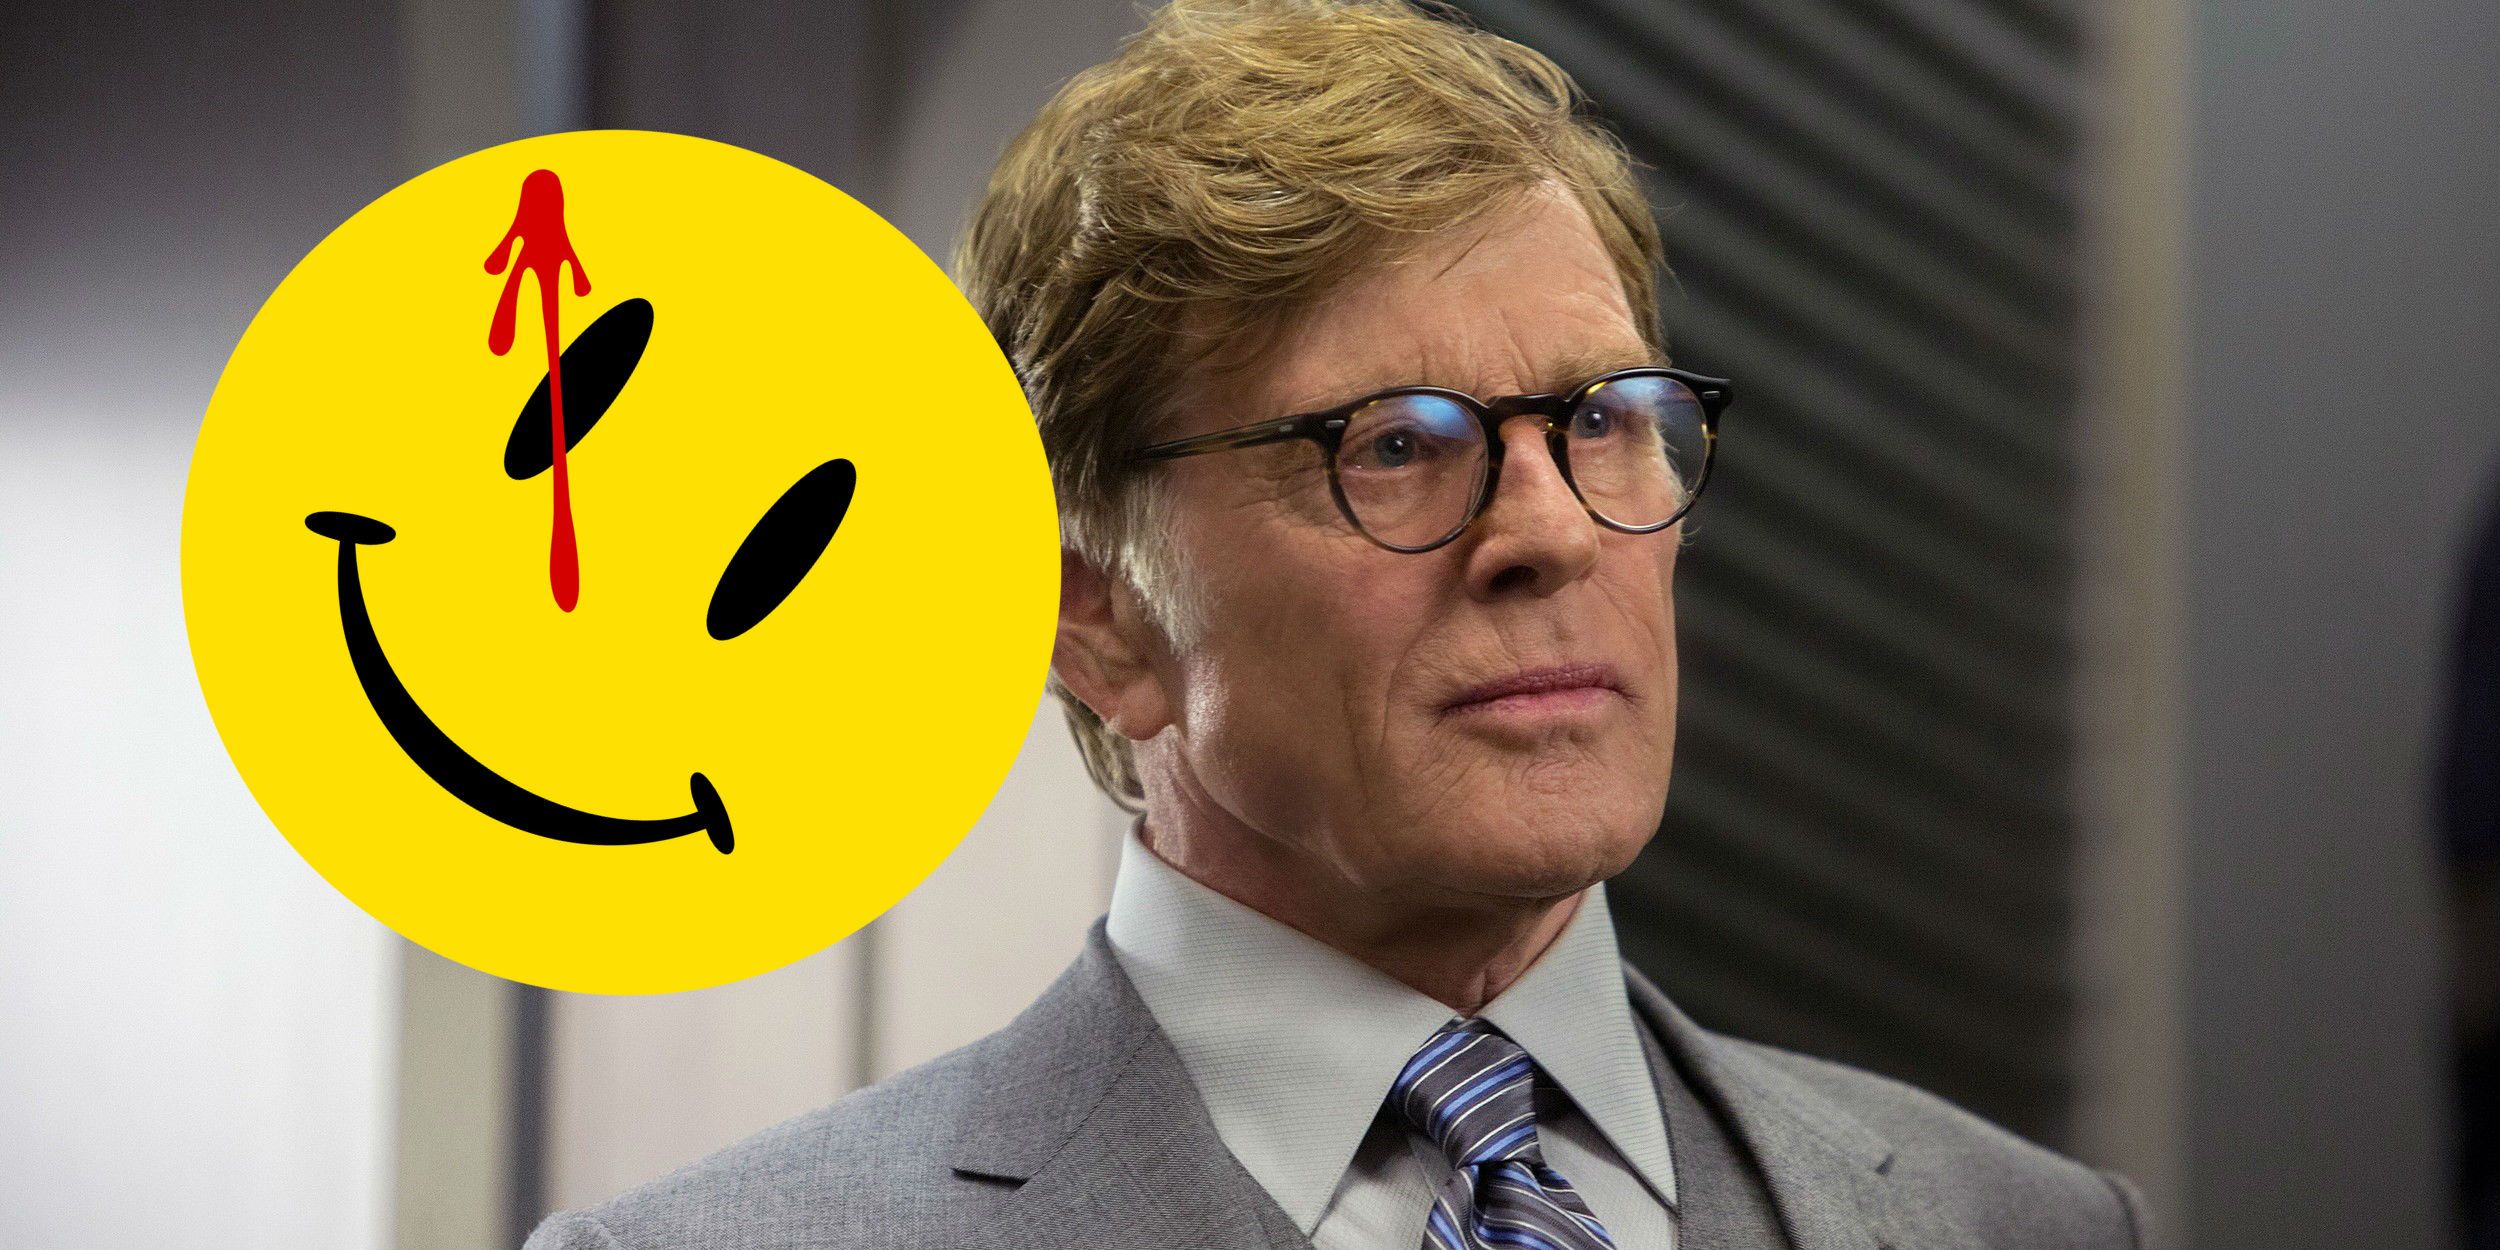 Watchmen Explains Robert Redford’s Presidency (& Why It’s Controversial)